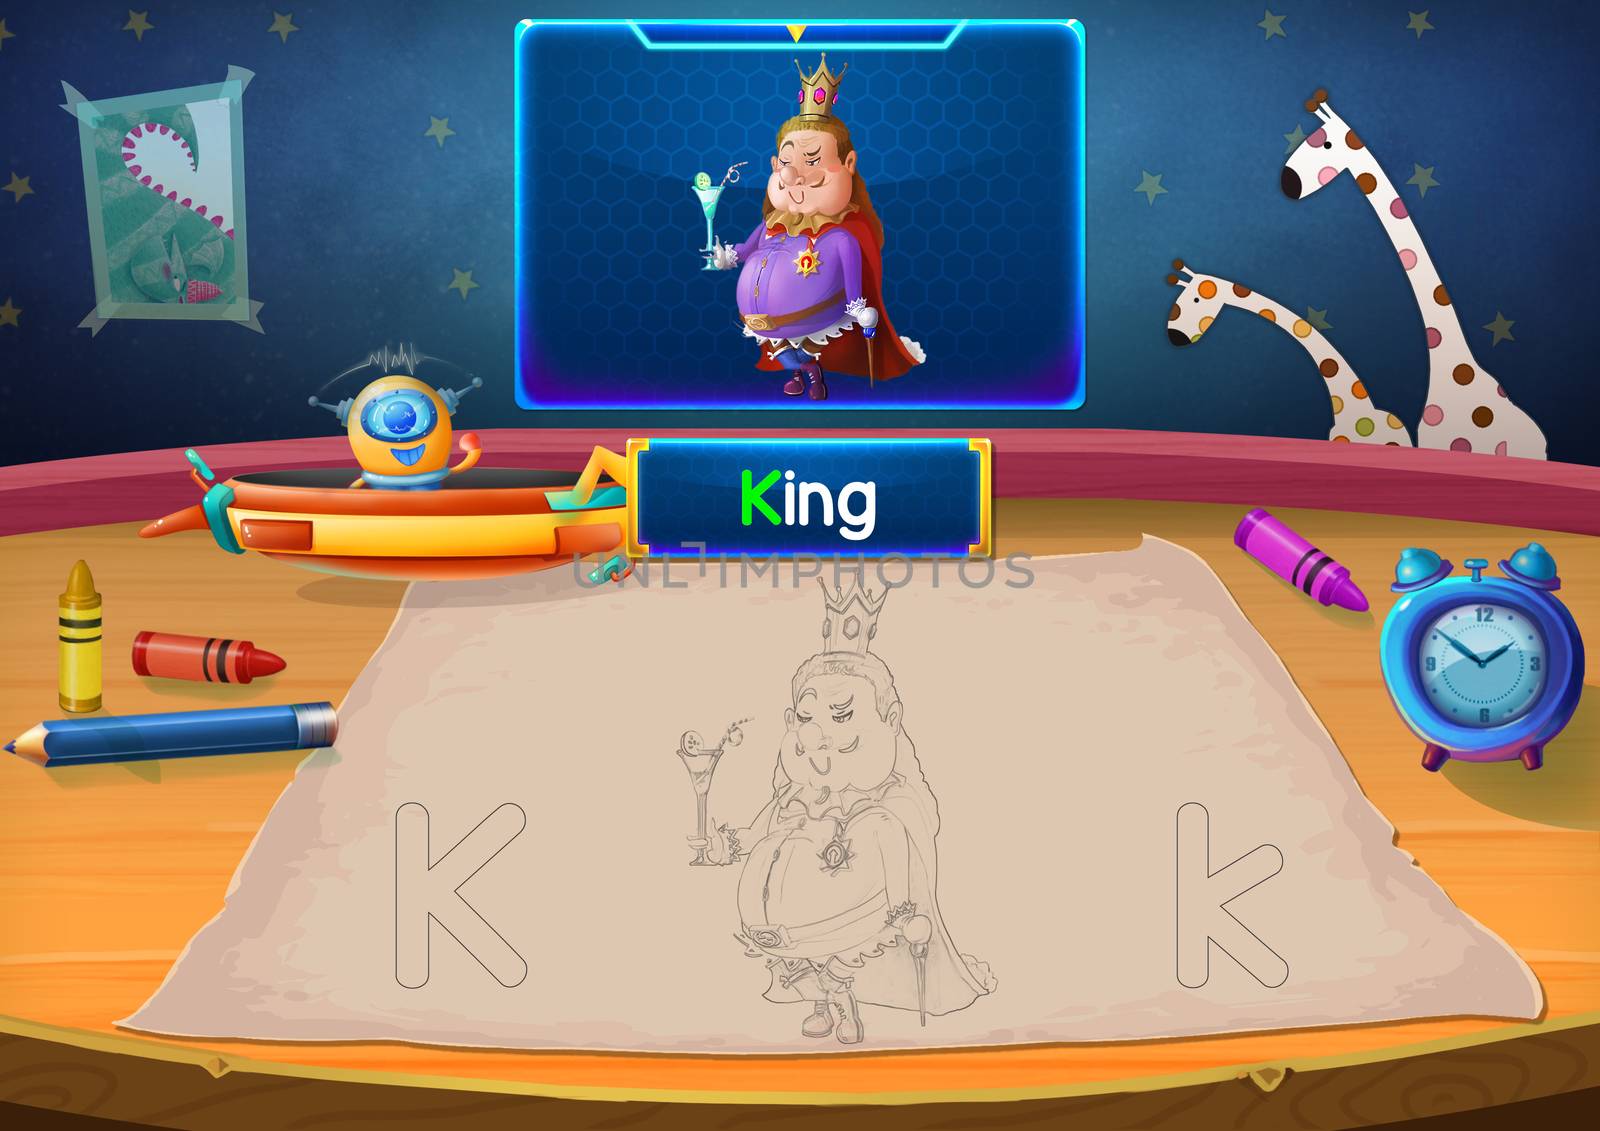 Illustration: Martian Class: K - King. The Martian in this picture opens a class for all Aliens. You must follow and use crayons coloring the outlines below. Fantastic Sci-Fi Cartoon Scene Design.